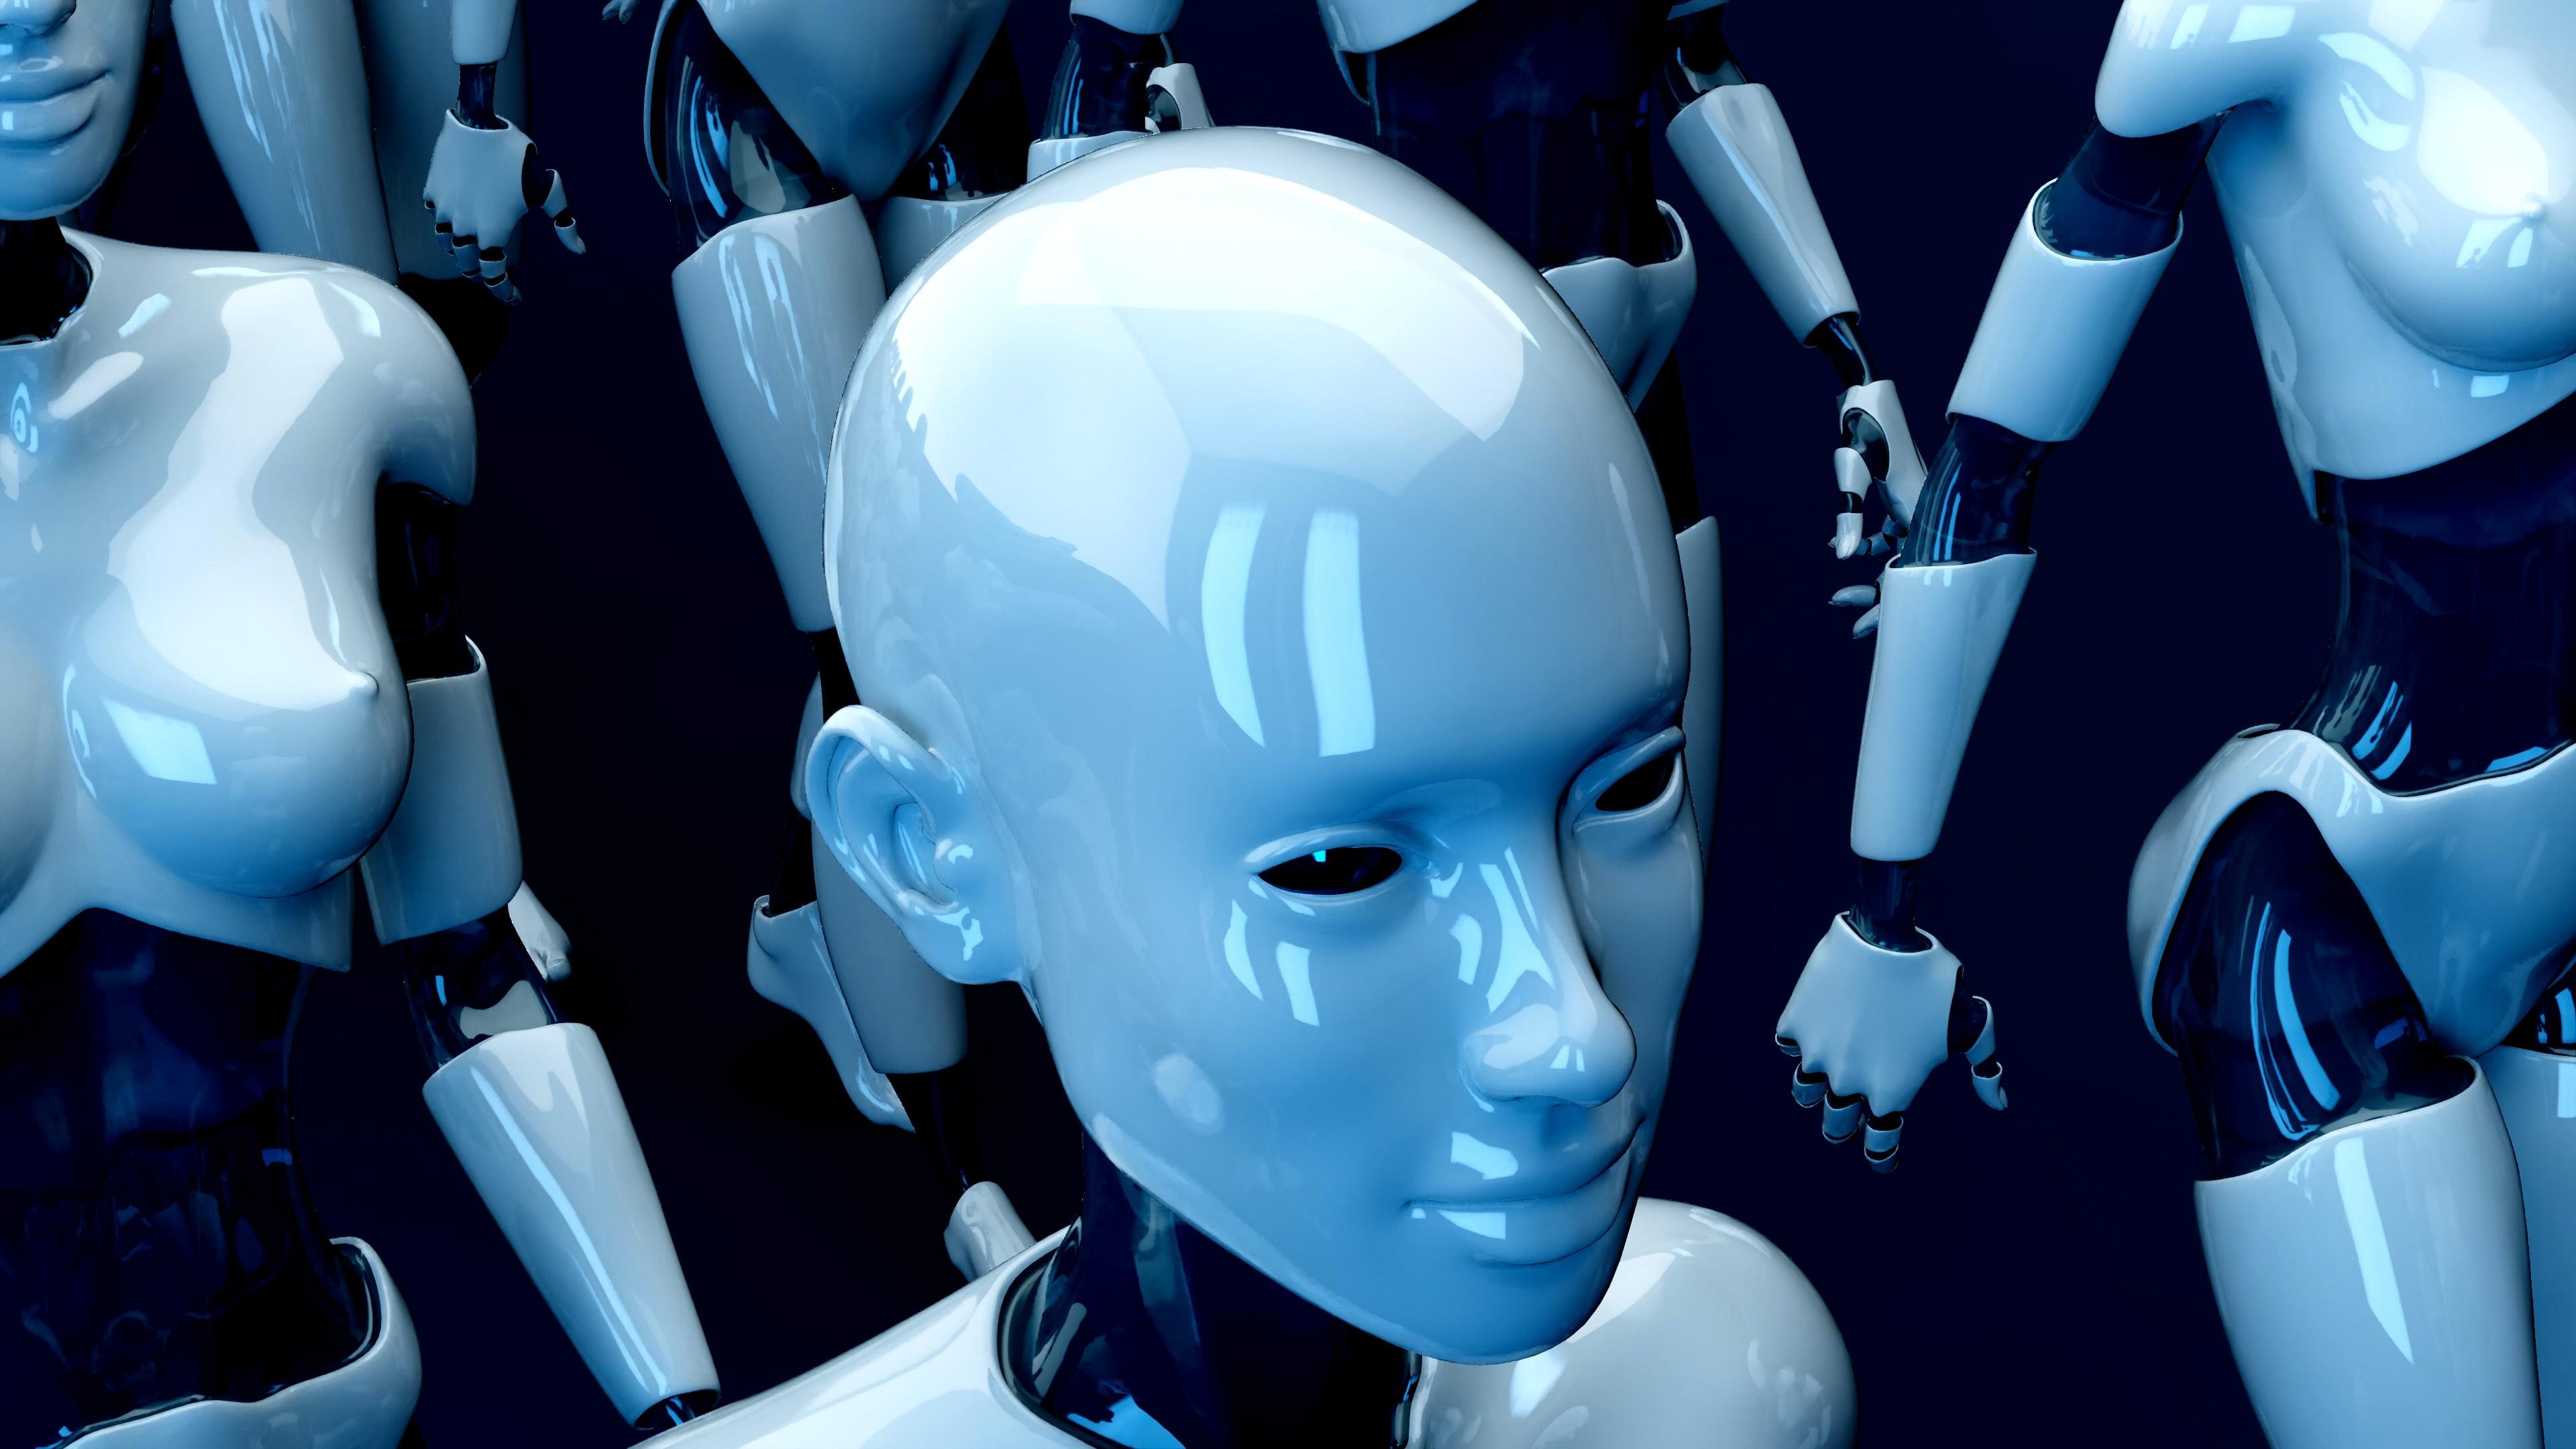 A group of futuristic looking "I, Robot" style robots